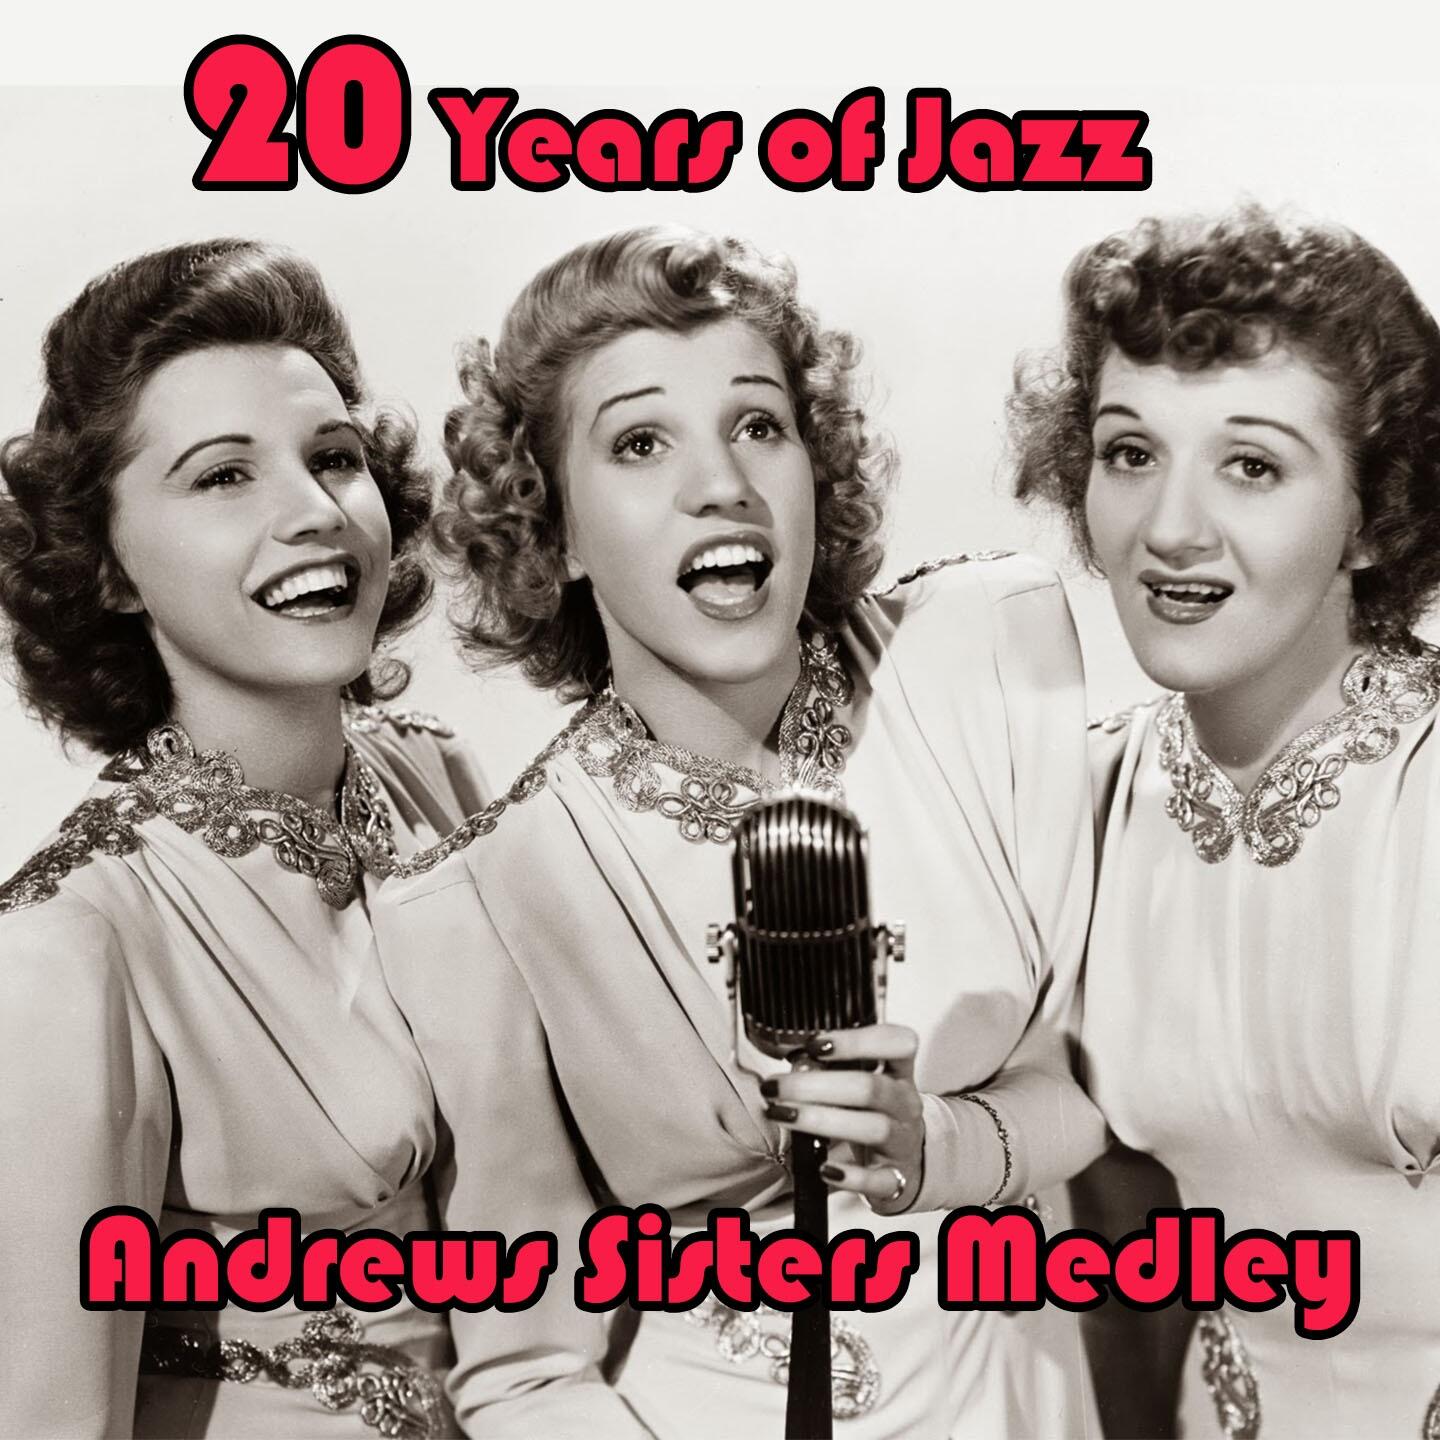 The Andrew Sisters - 20 Years of Jazz Medley:Sing Sing Sing / In 